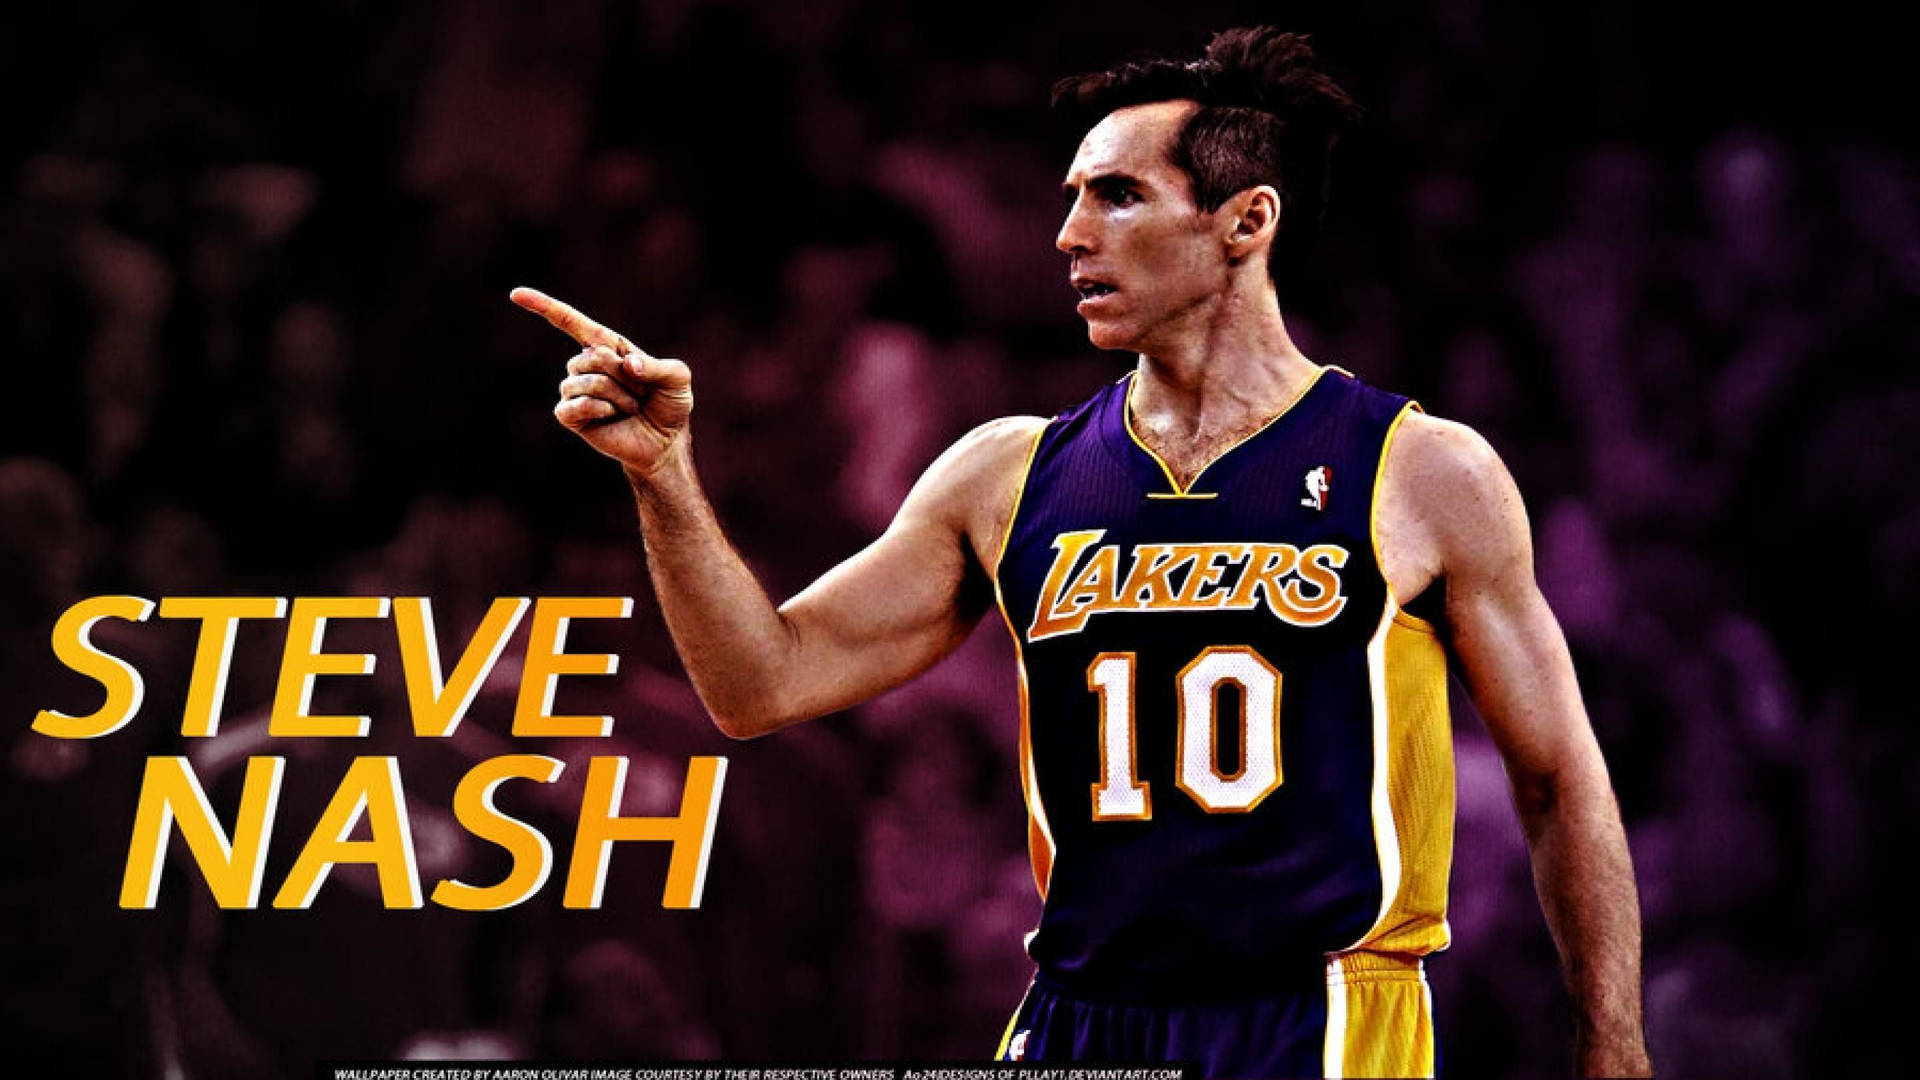 Steve Nash in Action for the Los Angeles Lakers Wallpaper